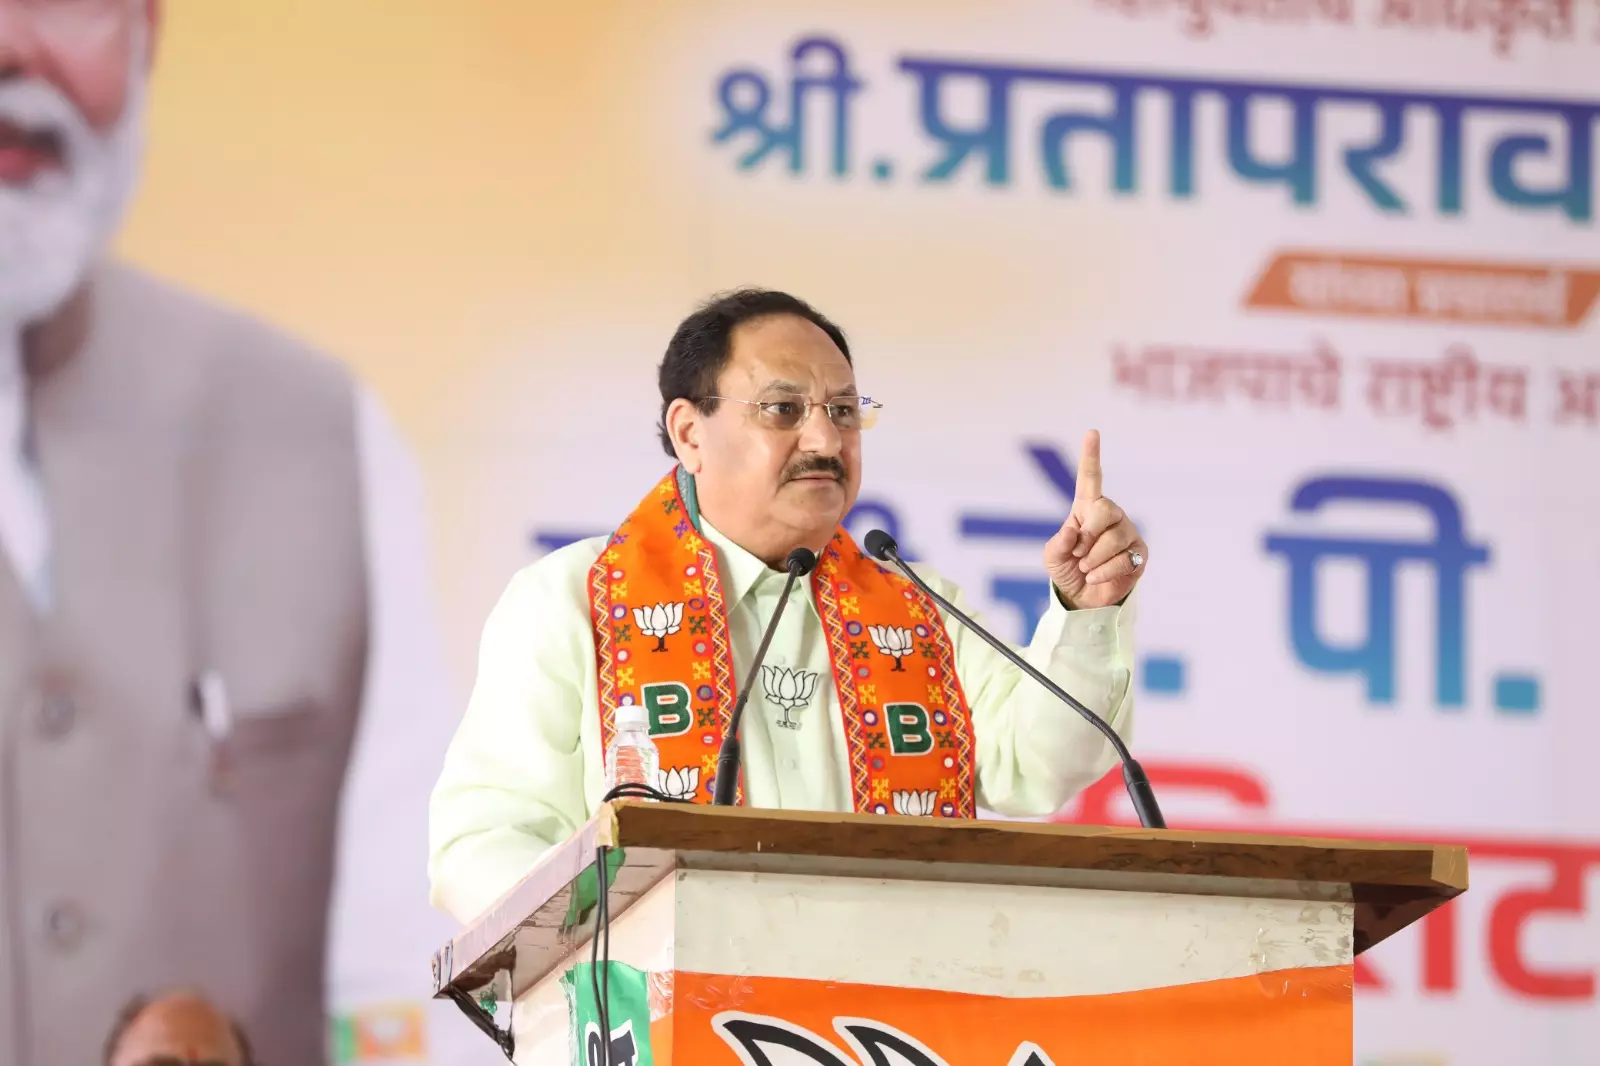 MP: Modi’s Crusade Against Corruption To Intensify After Polls: Nadda